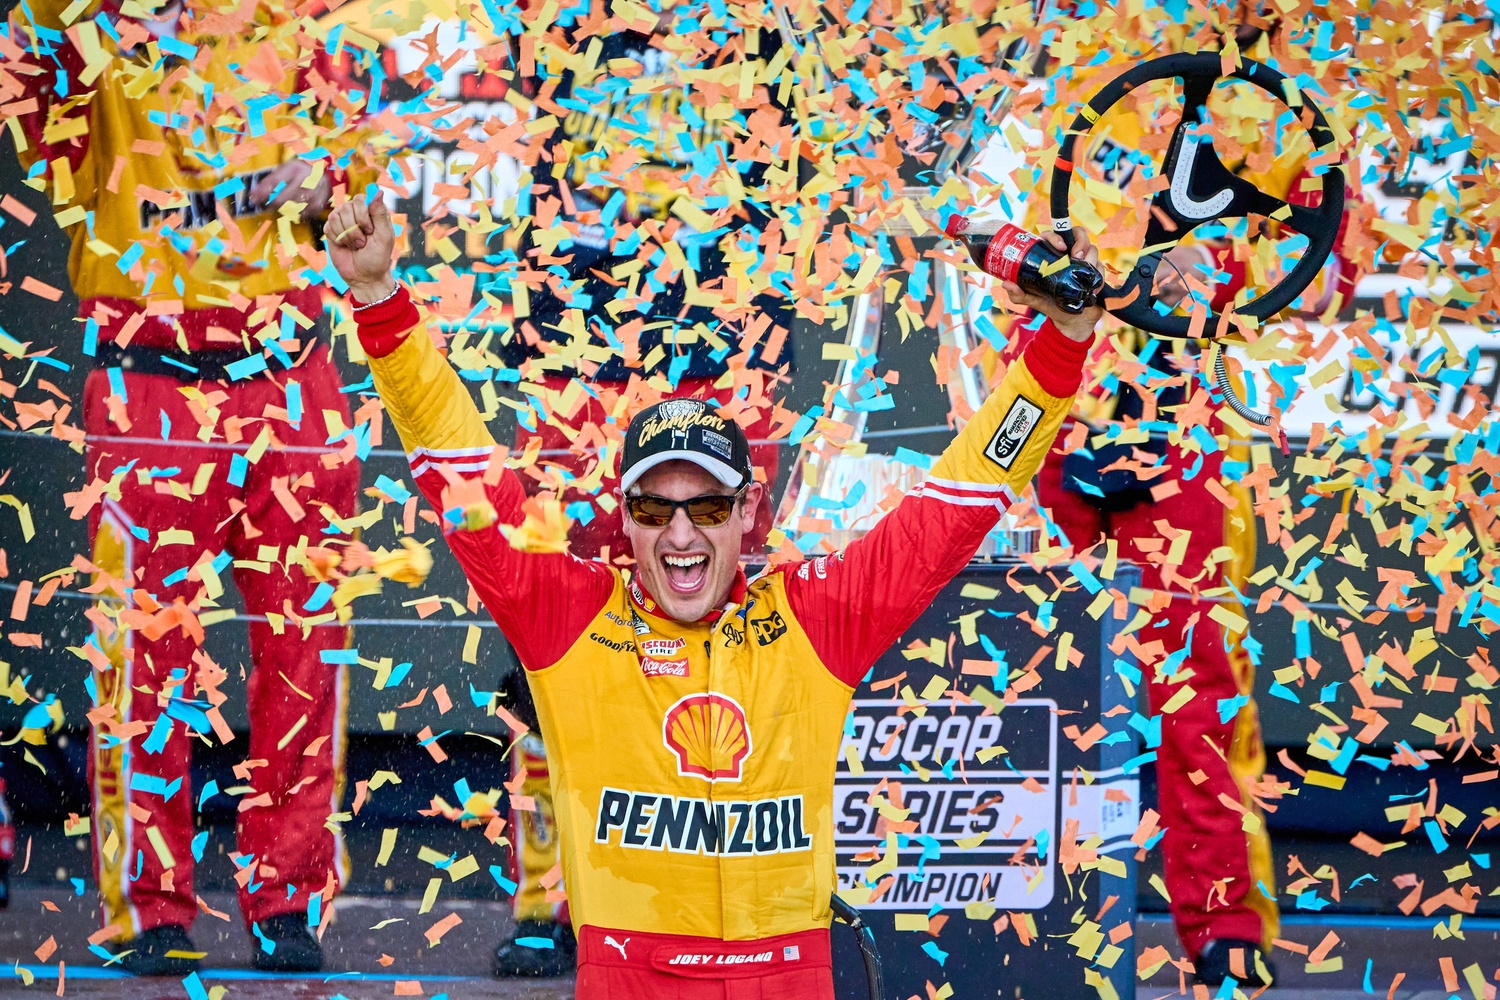 Penske Material: 22 In 22 Was Meant To Be